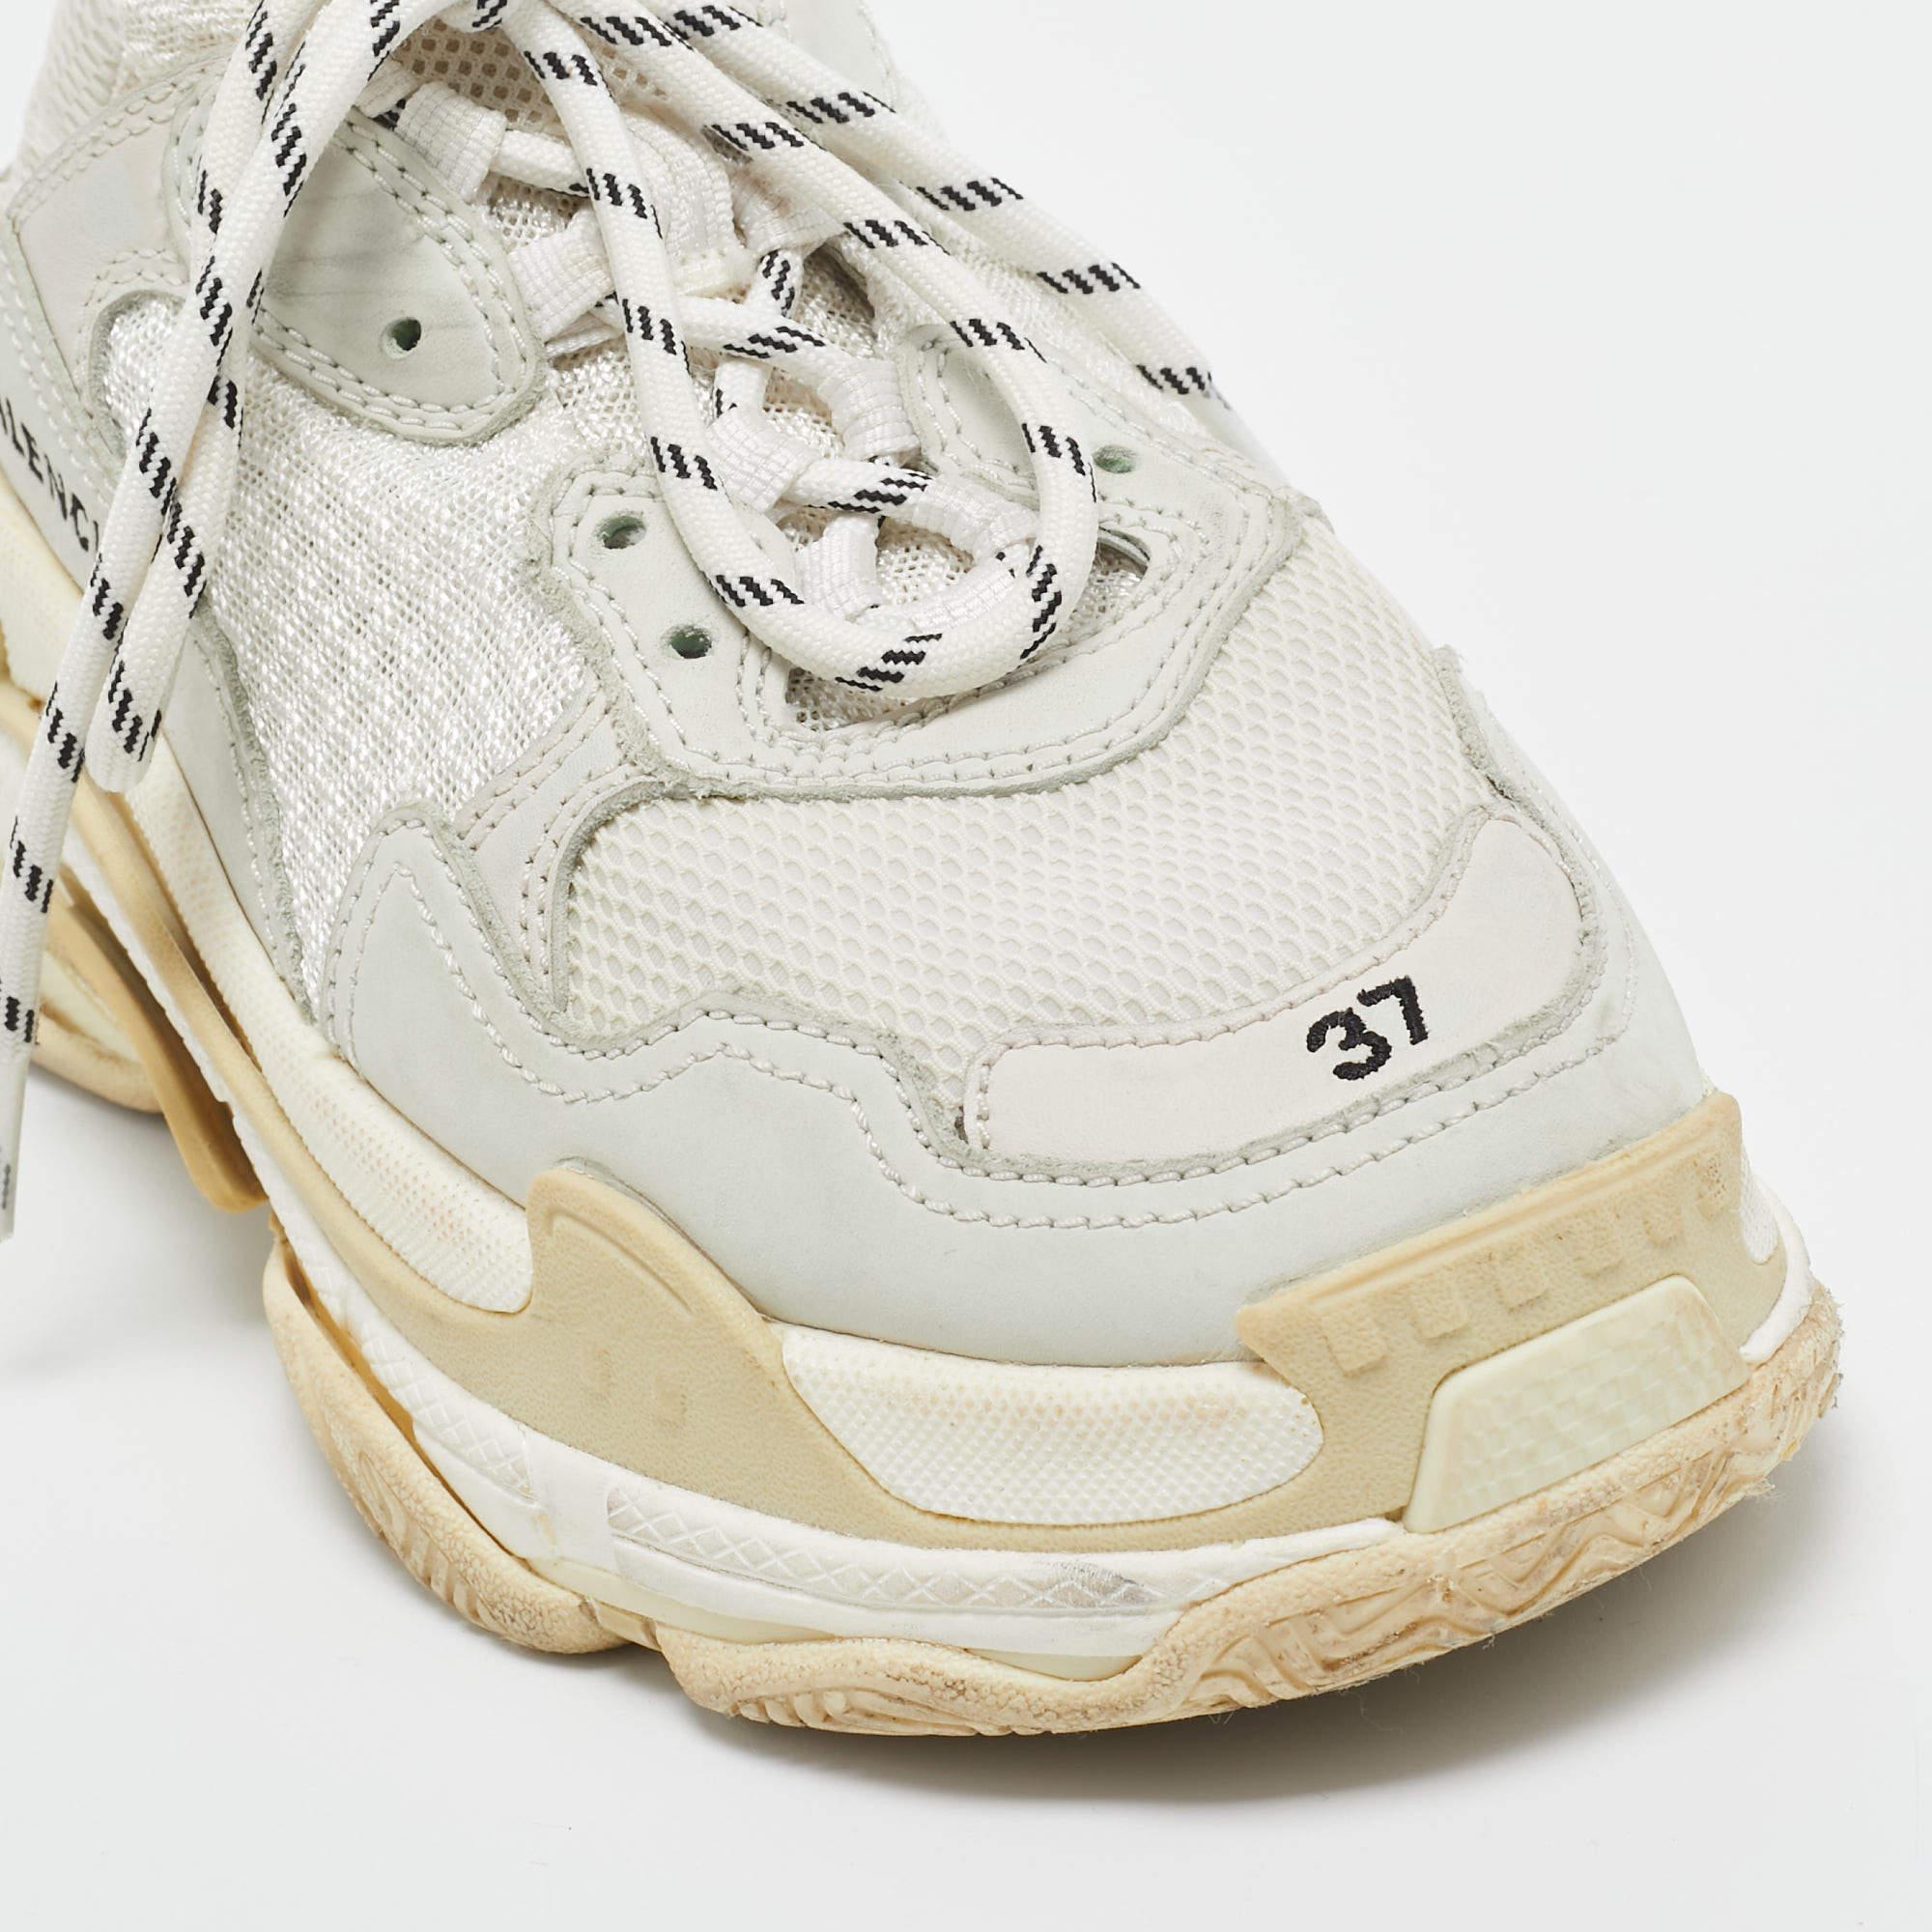 Elevate your footwear game with these Balenciaga sneakers. Combining high-end aesthetics and unmatched comfort, these sneakers are a symbol of modern luxury and impeccable taste.

